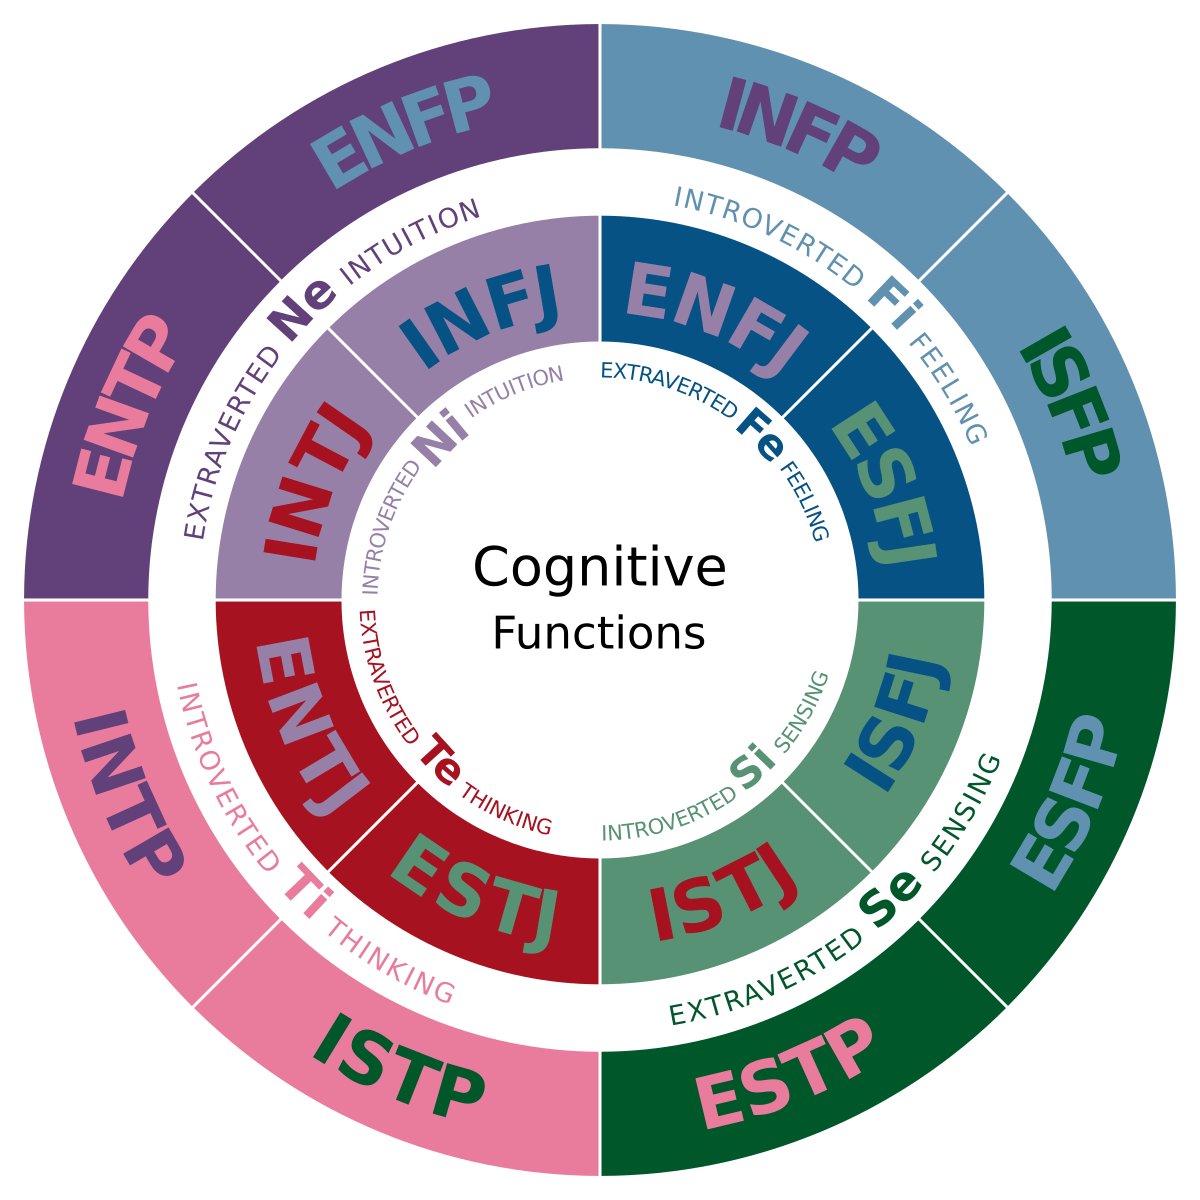 A diagram depicting the cognitive functions of each Myers-Briggs personality type. Author: JakeBeech